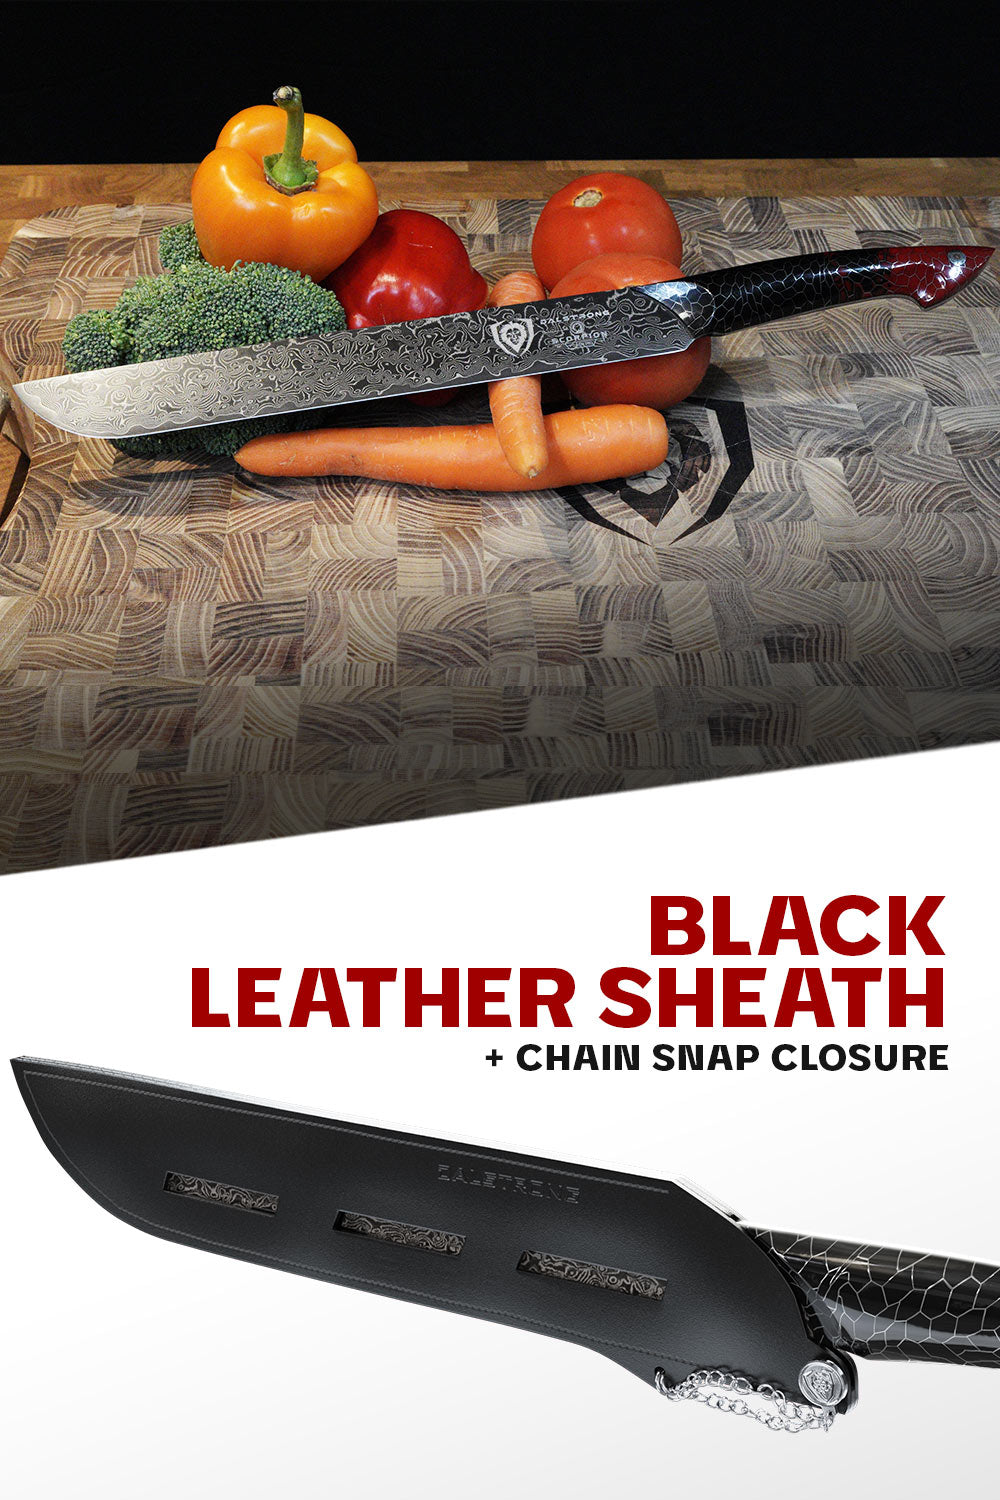 Dalstrong scorpion series 11 inch slicing knife with red handle featuring it's black leather sheath.